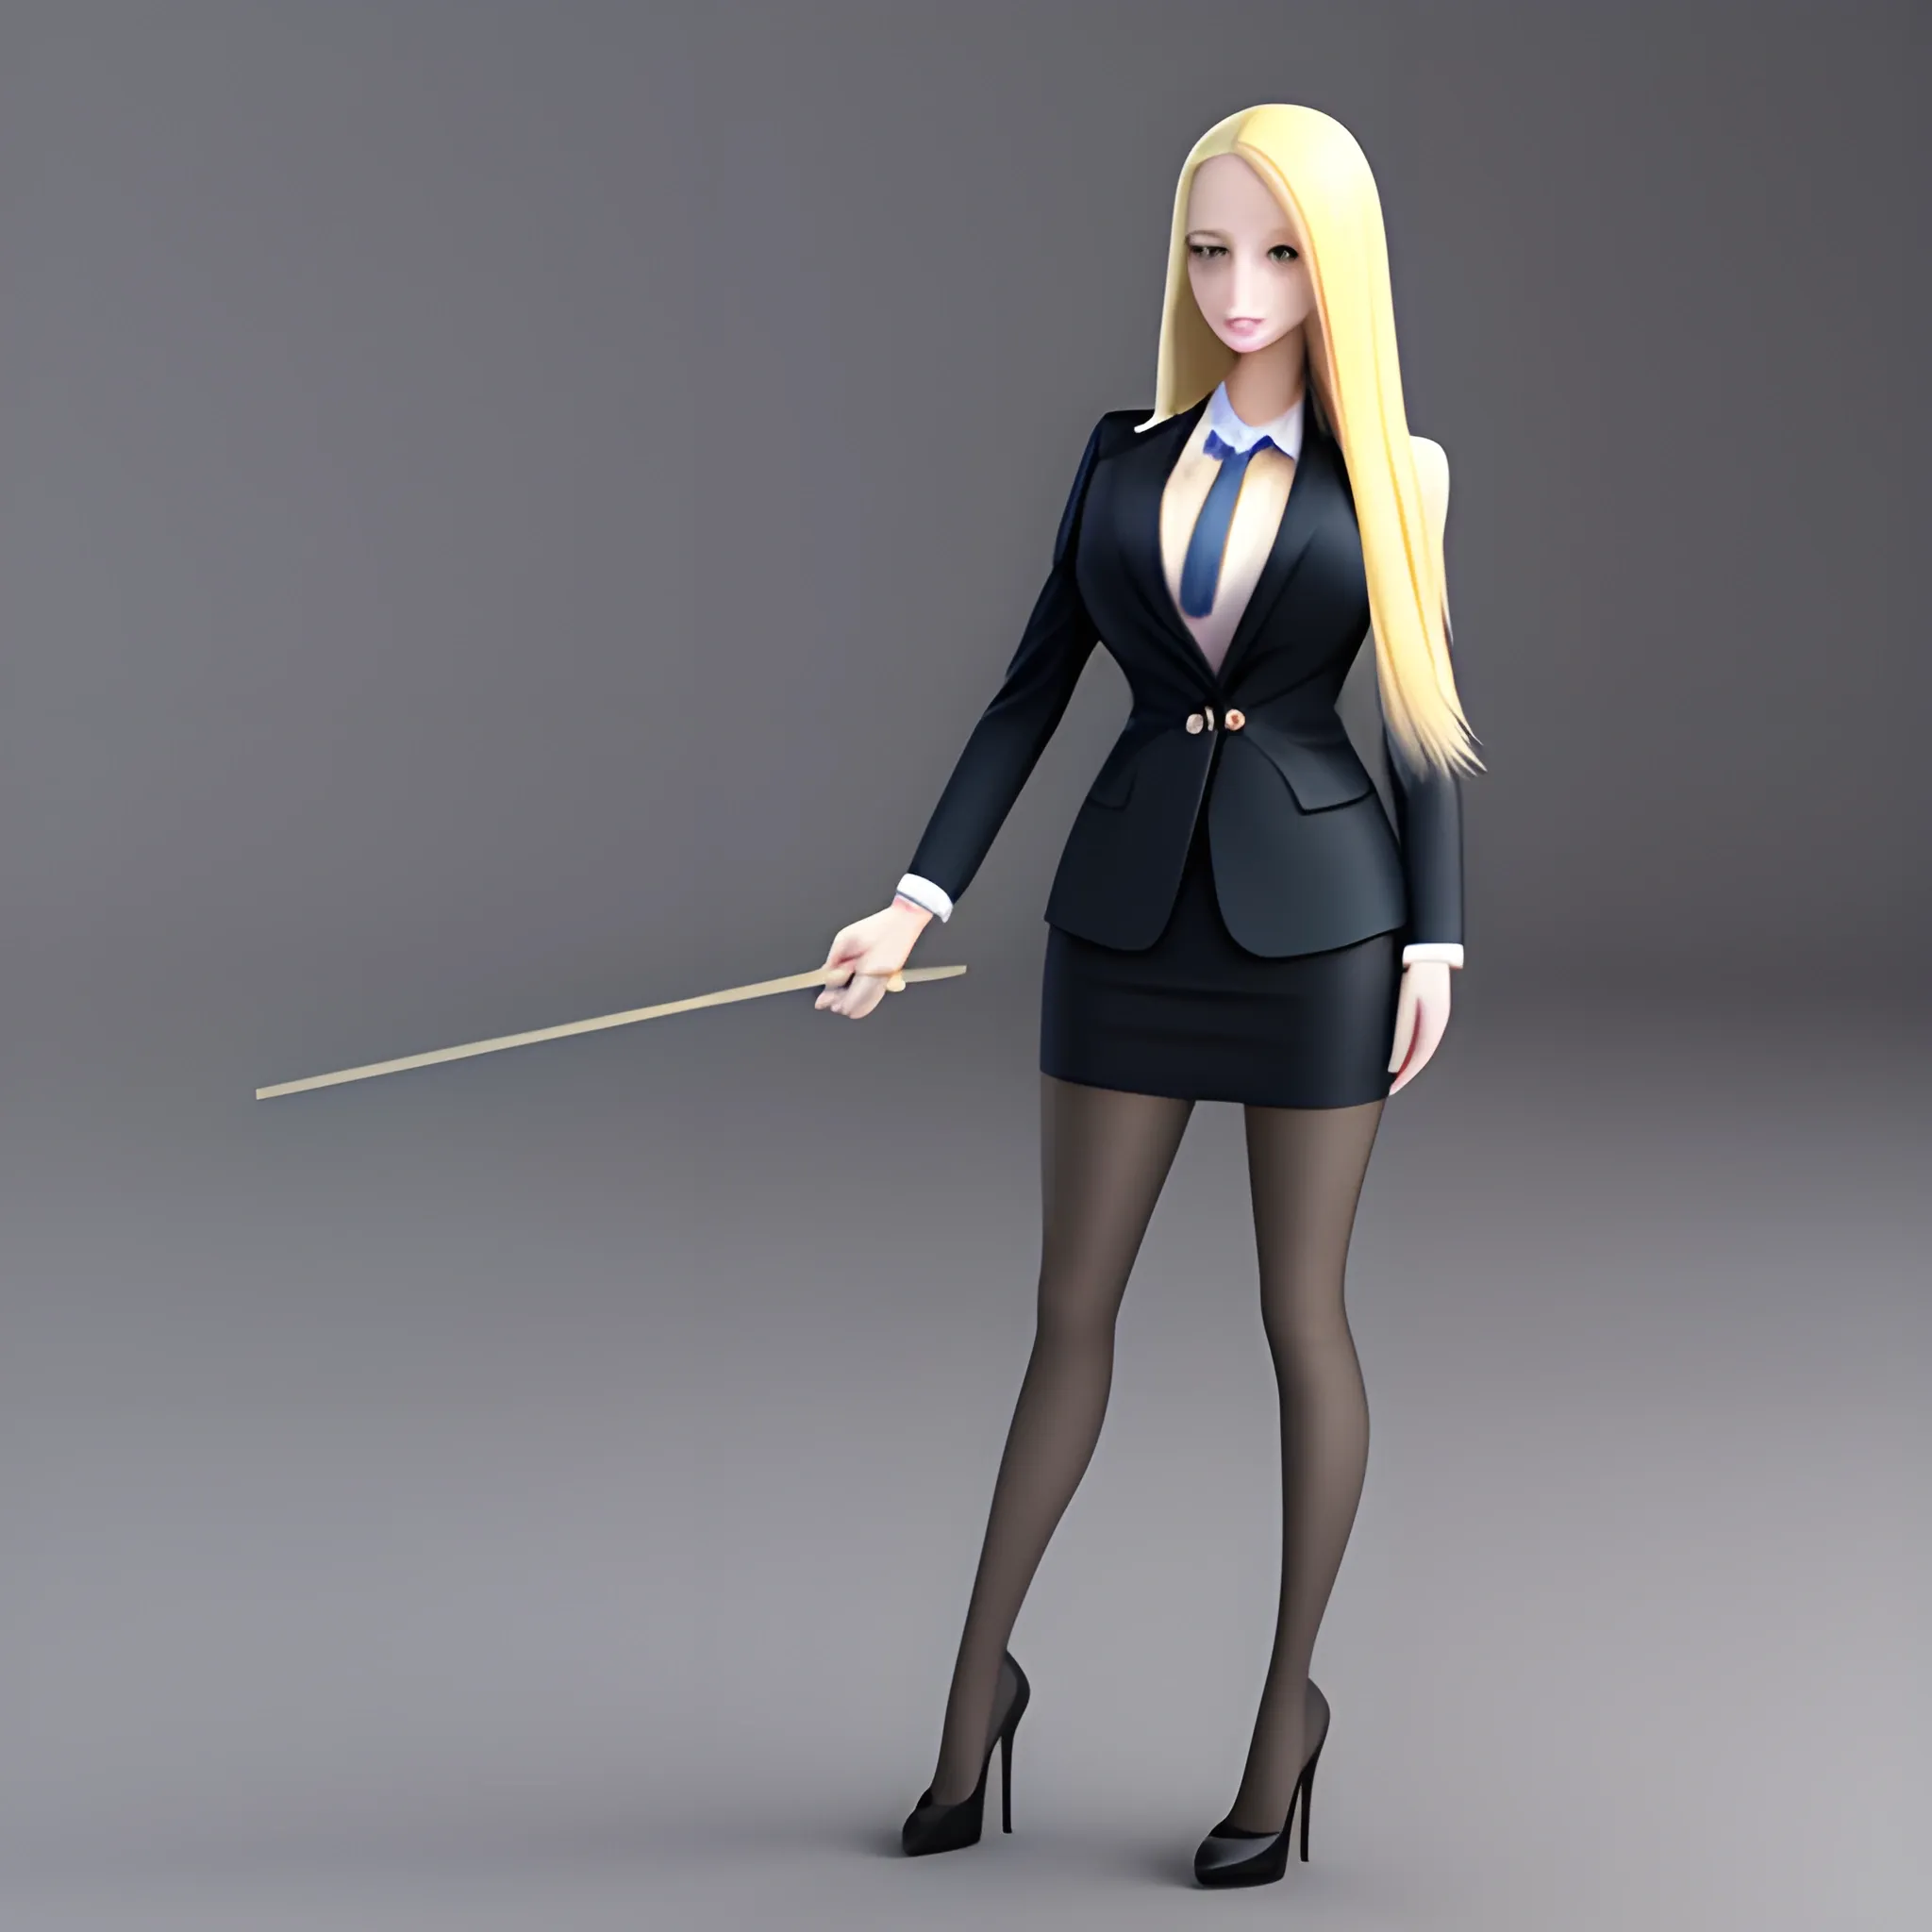 Blue eyes, very long and thick blonde hair, dramatic hourglass figure, five-foot five-inches tall, wearing high-heels, nice business suit, 3D